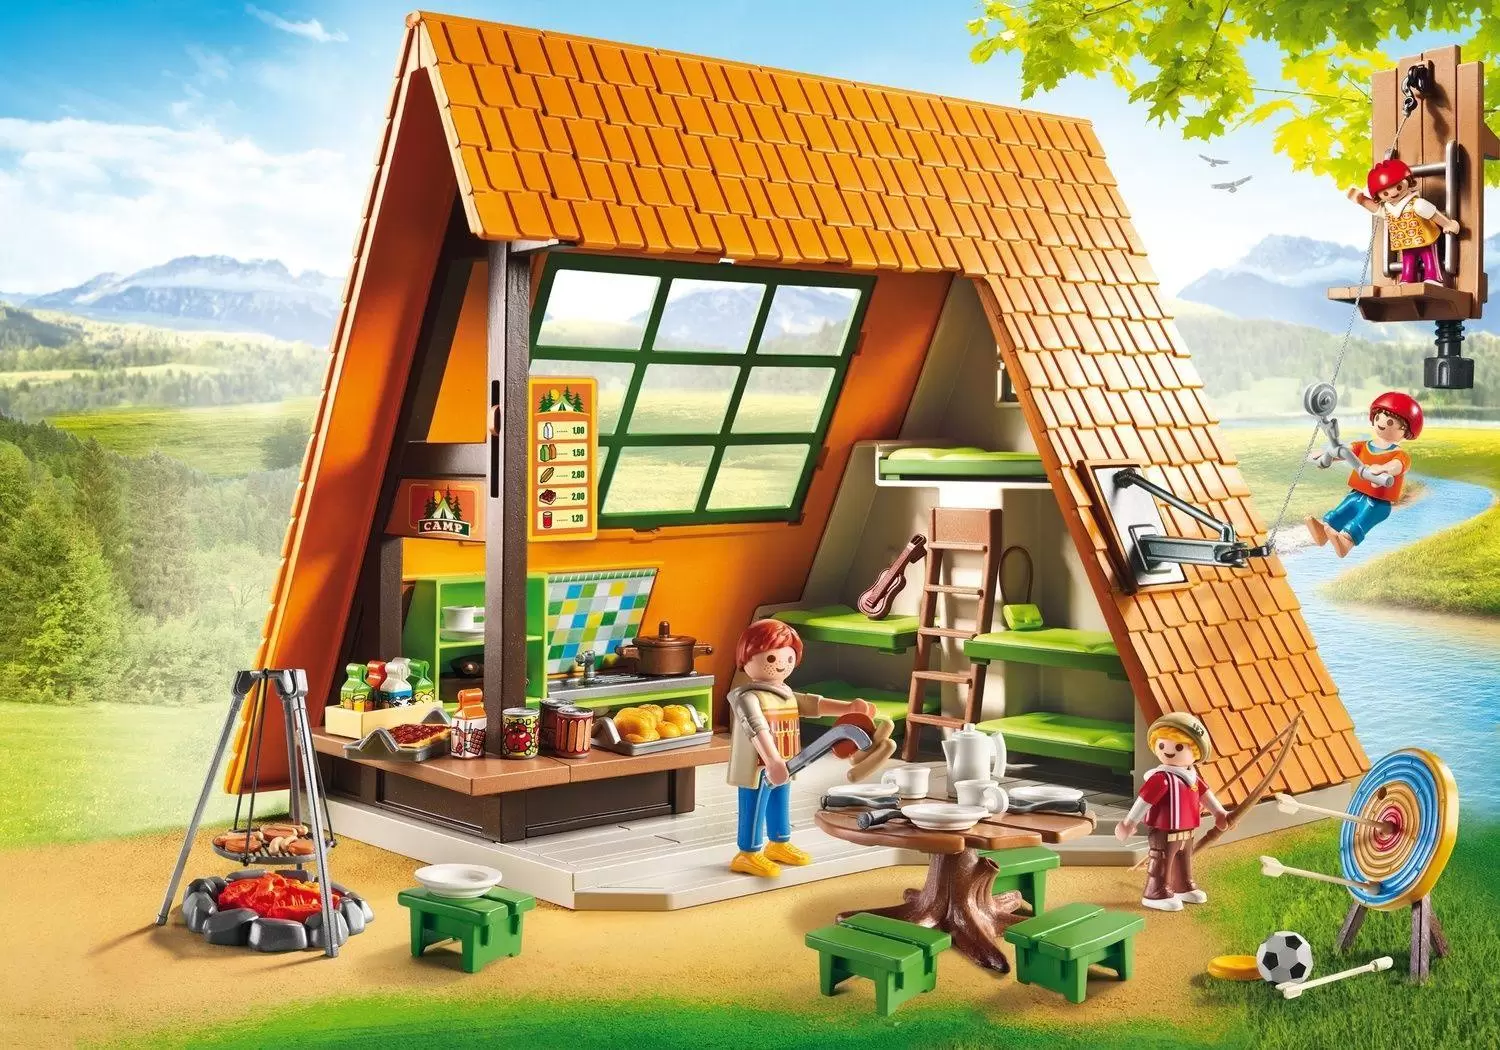 Playmobil on Hollidays - Great Holiday Camp